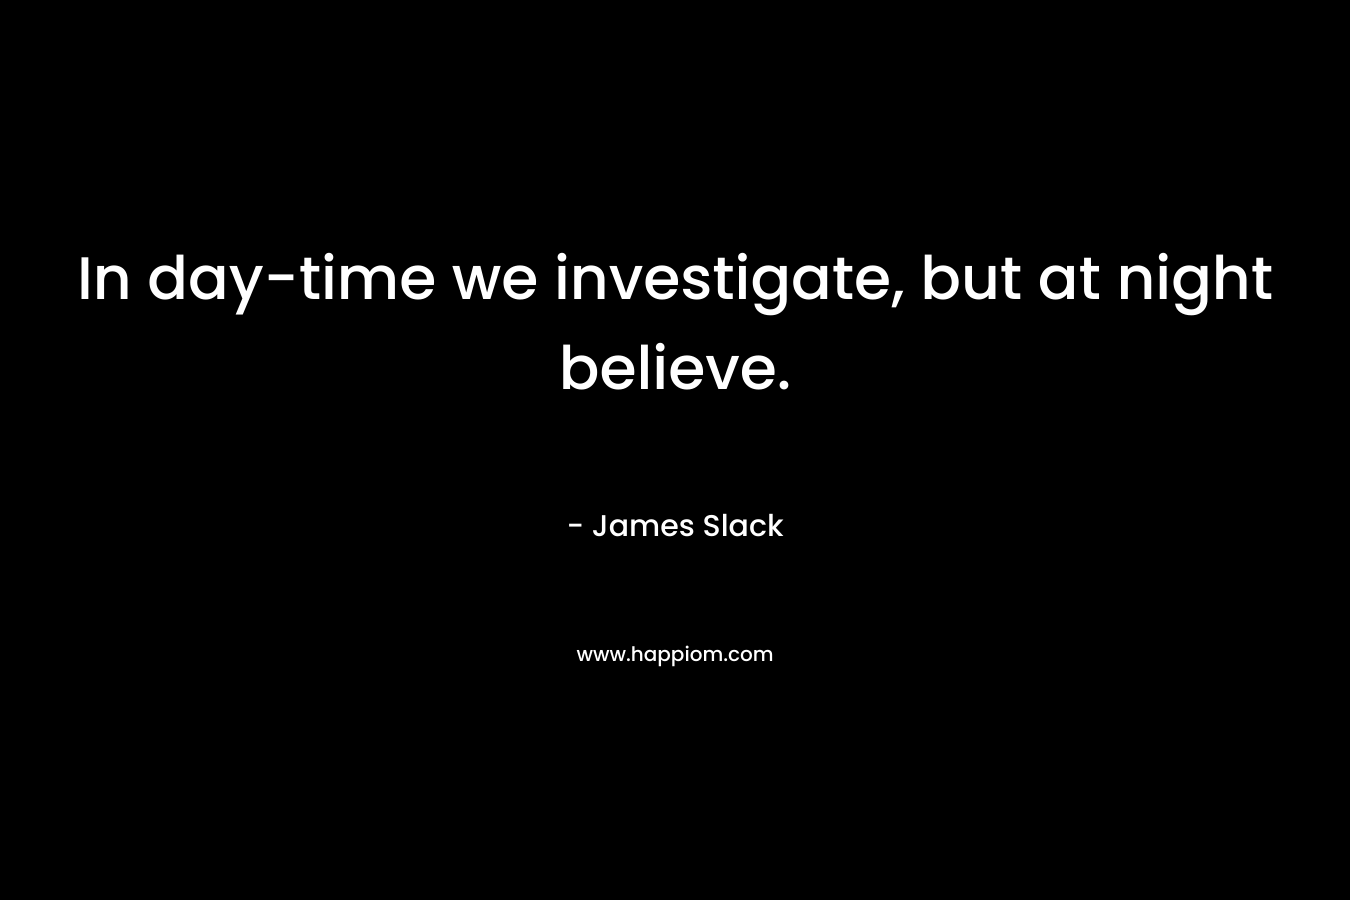 In day-time we investigate, but at night believe. – James Slack